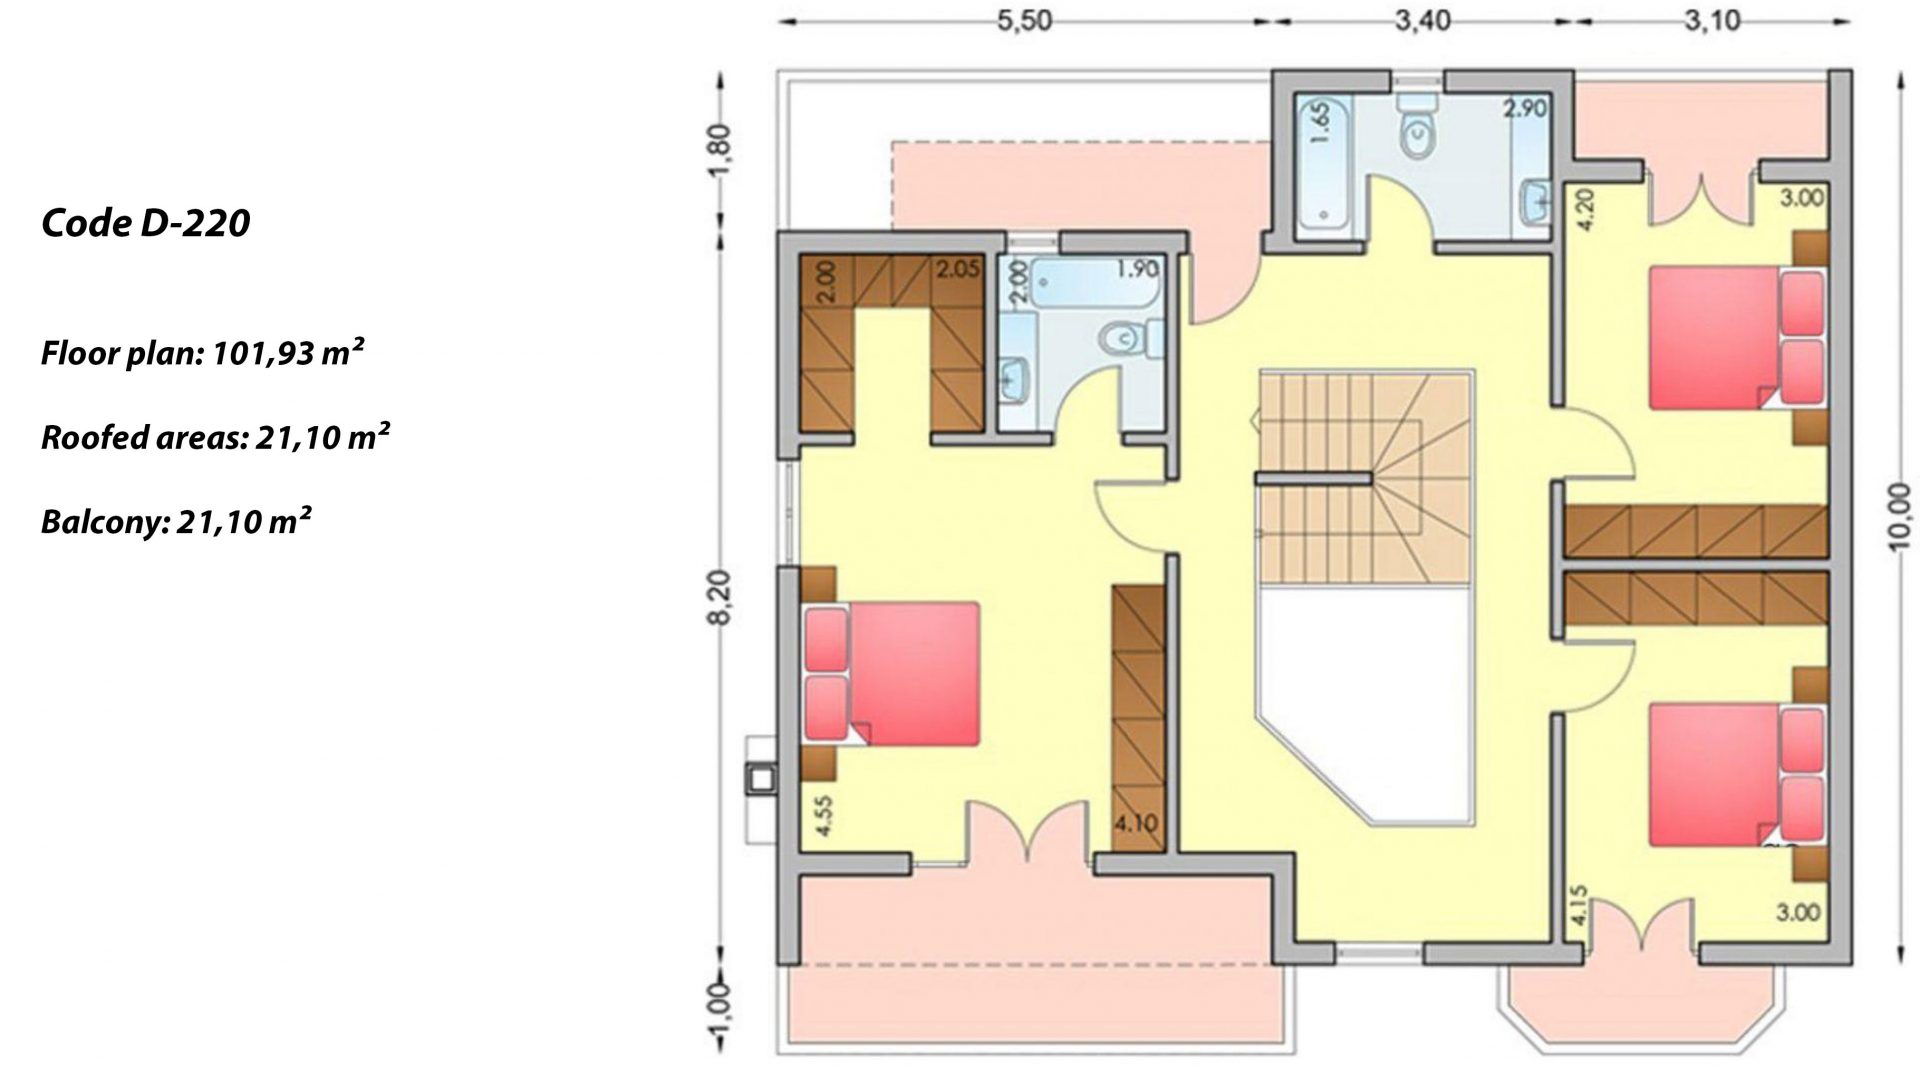 2-story house D-220, total surface of 220,70 m² ,covered roofed areas 48.40 m²,balconies 21.10 m²